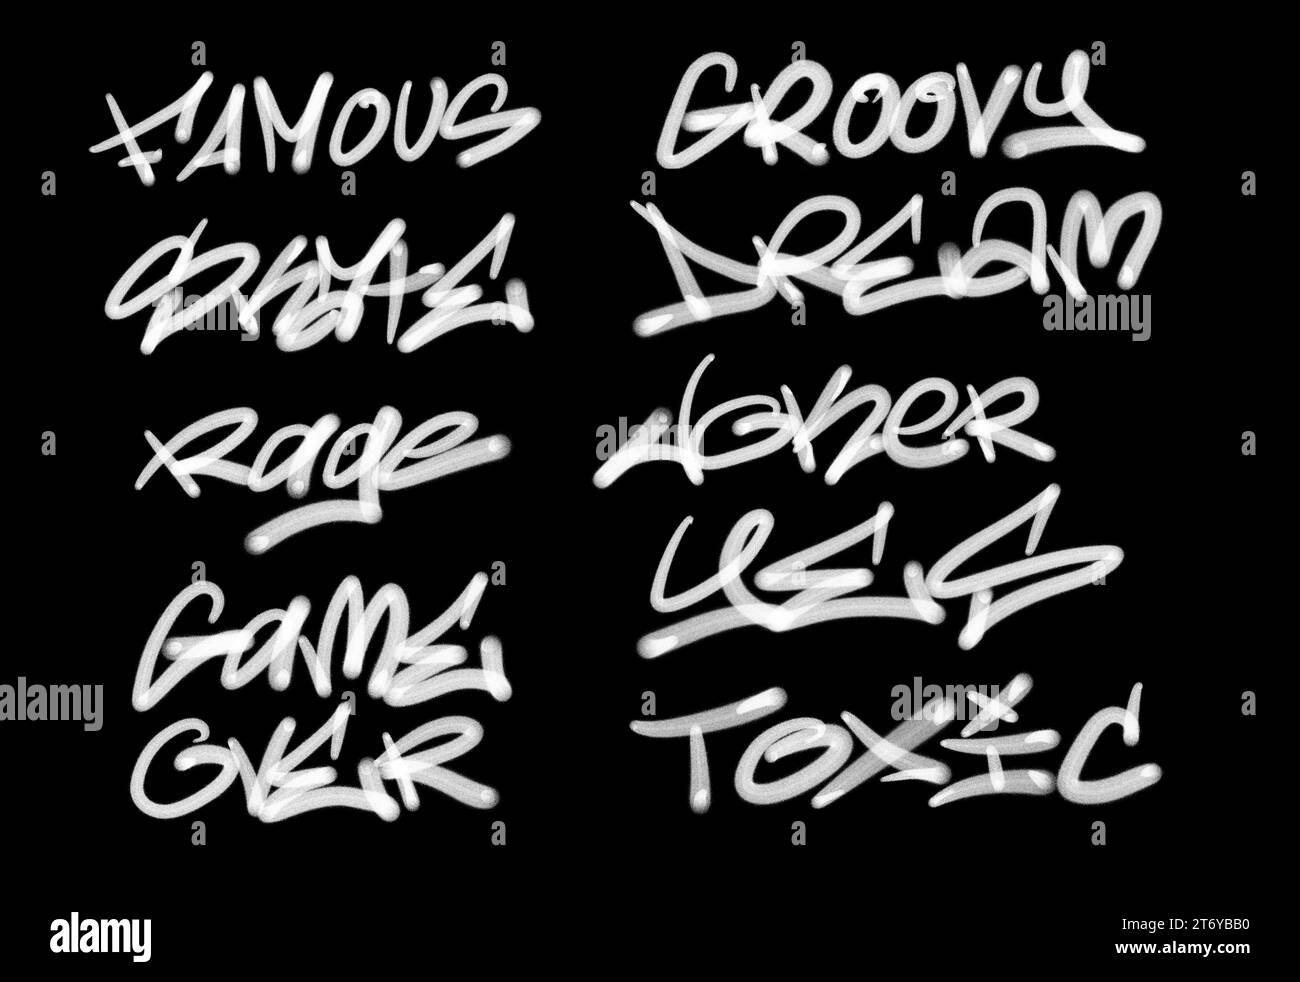 Collection of graffiti street art tags with words and symbols in white color on black background Stock Photo